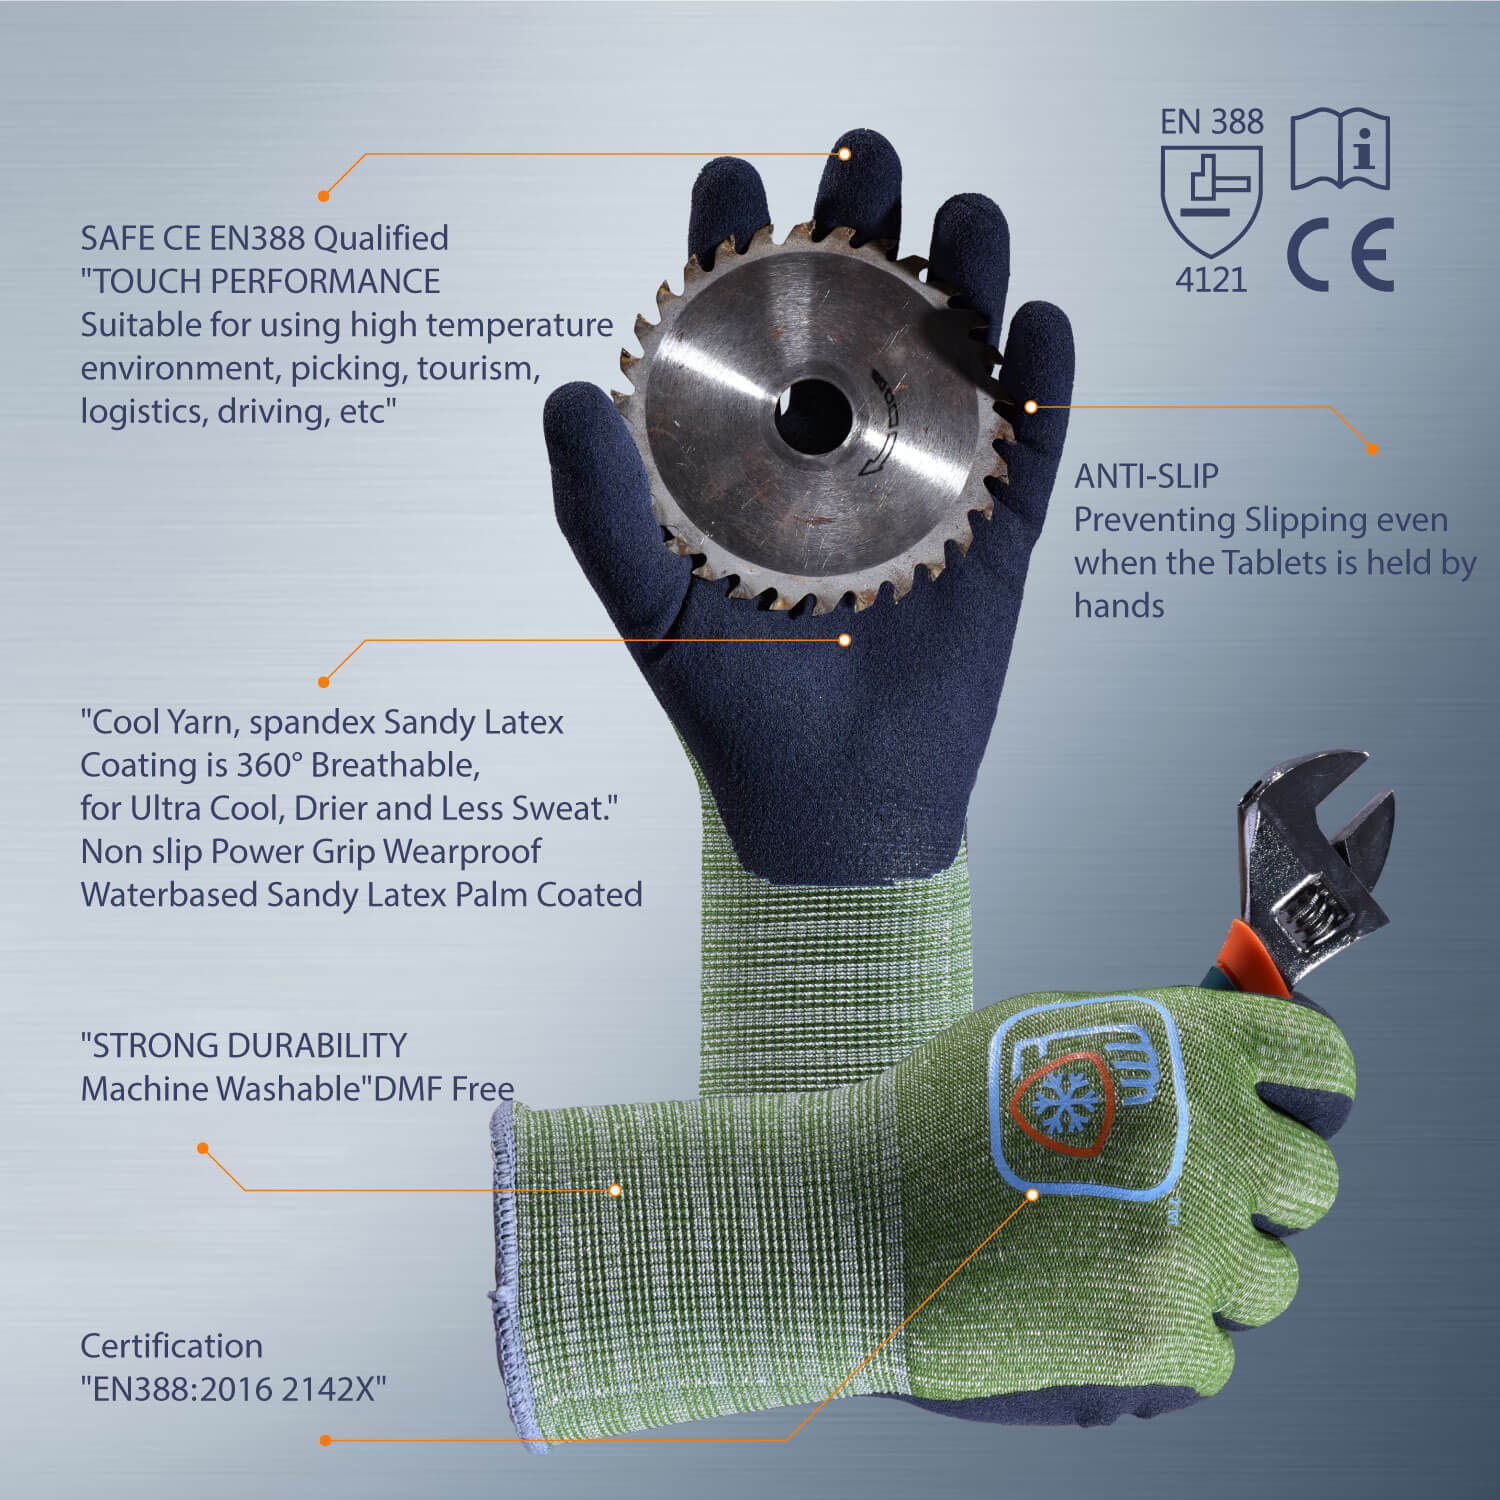 SAFEYEAR Safety Work Gloves, Latex Coated Safety Gloves for Gardening and Builders